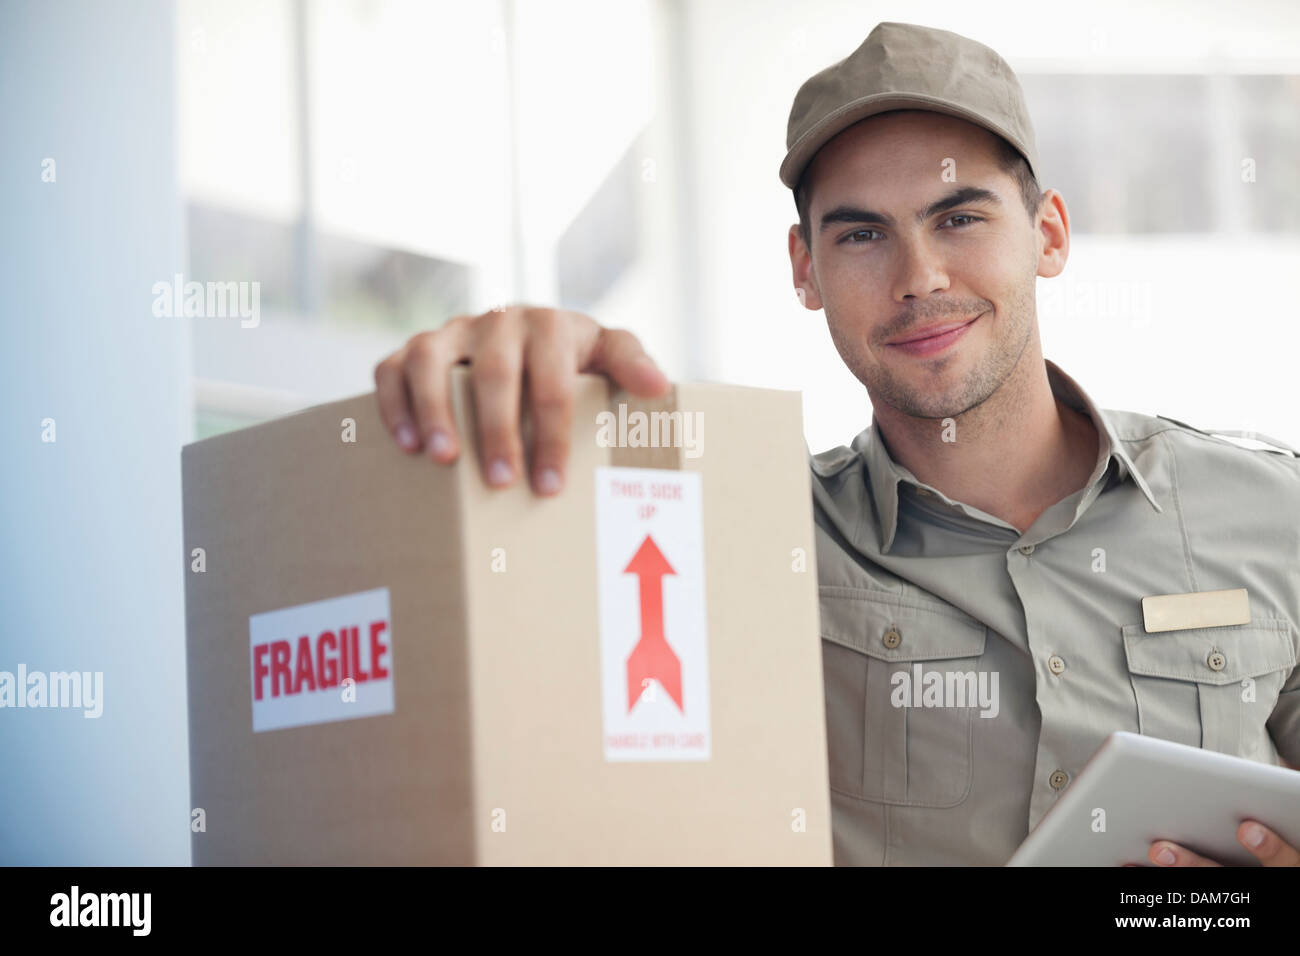 Delivery boy carrying ‘fragile’ package Stock Photo